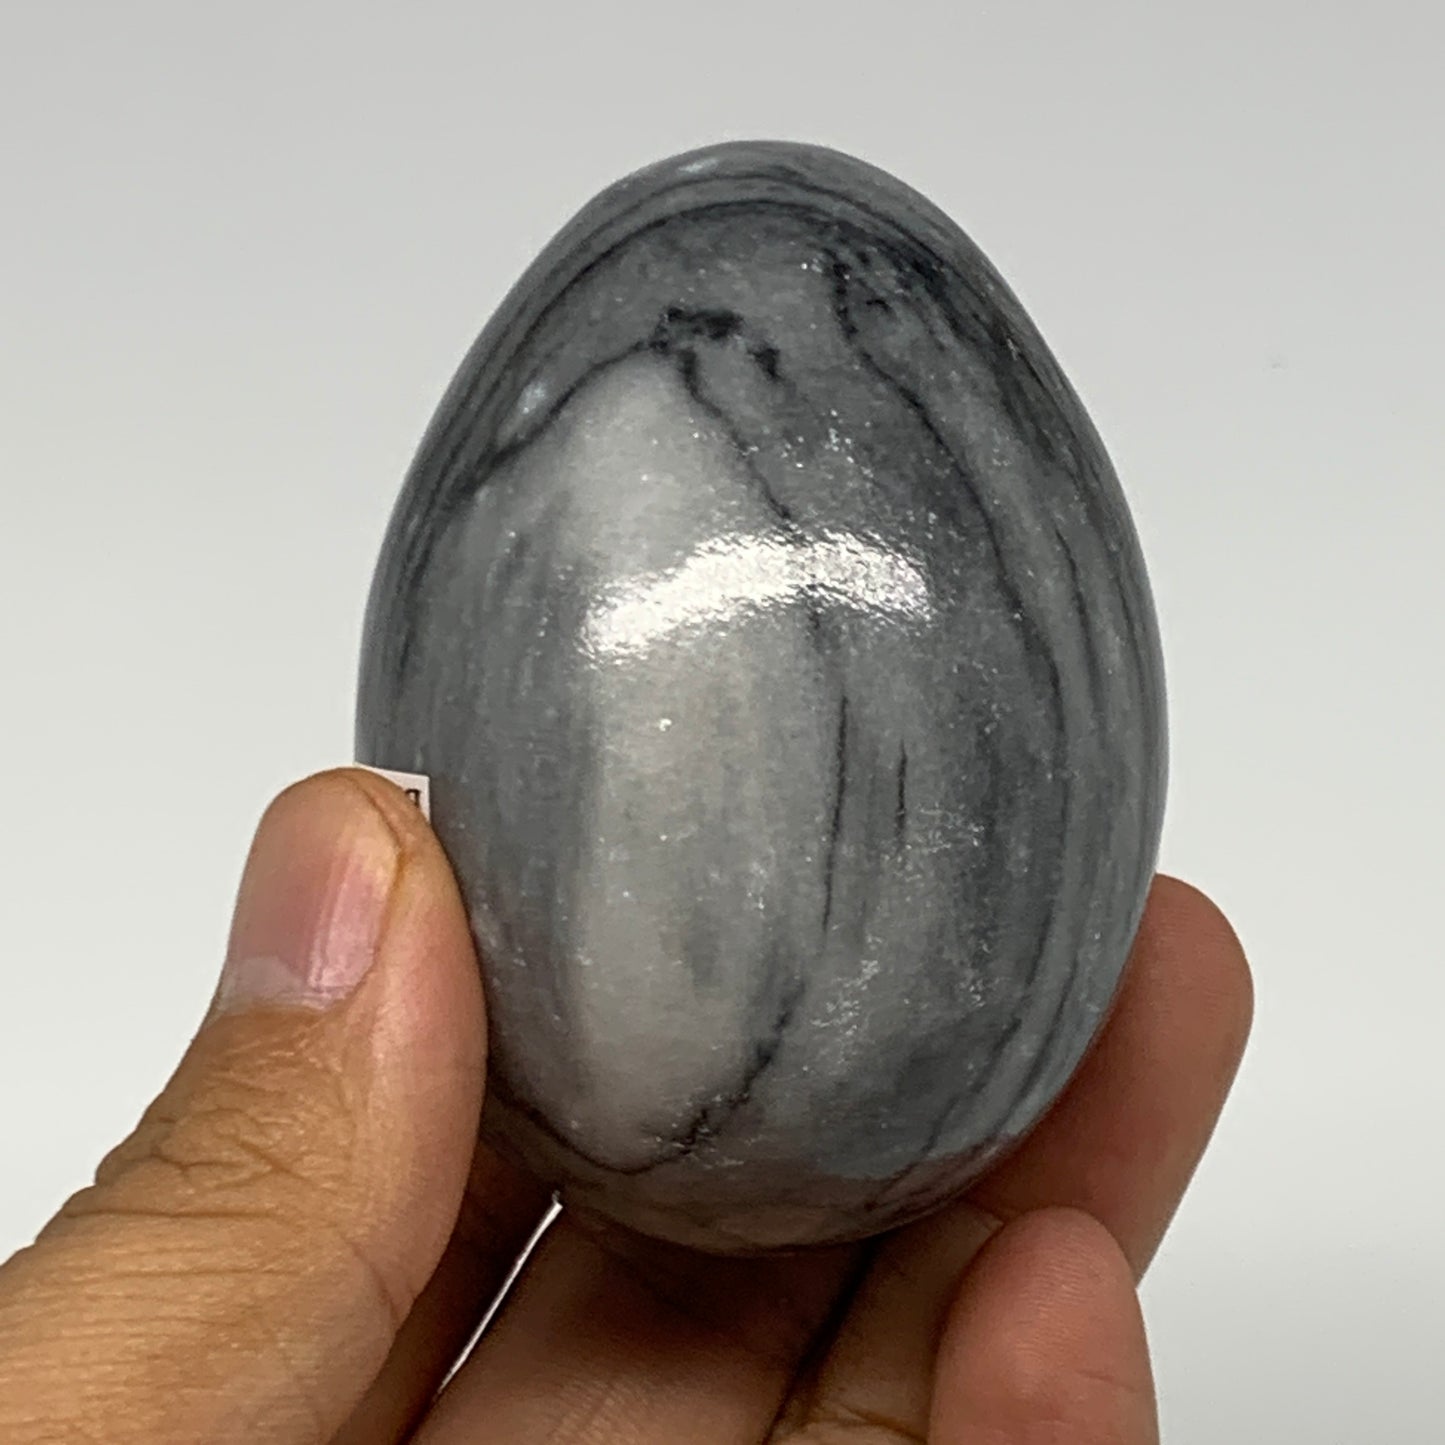 221.4g, 2.6"x1.9" Natural Gray Onyx Egg Gemstone Mineral, from Mexico, B21573